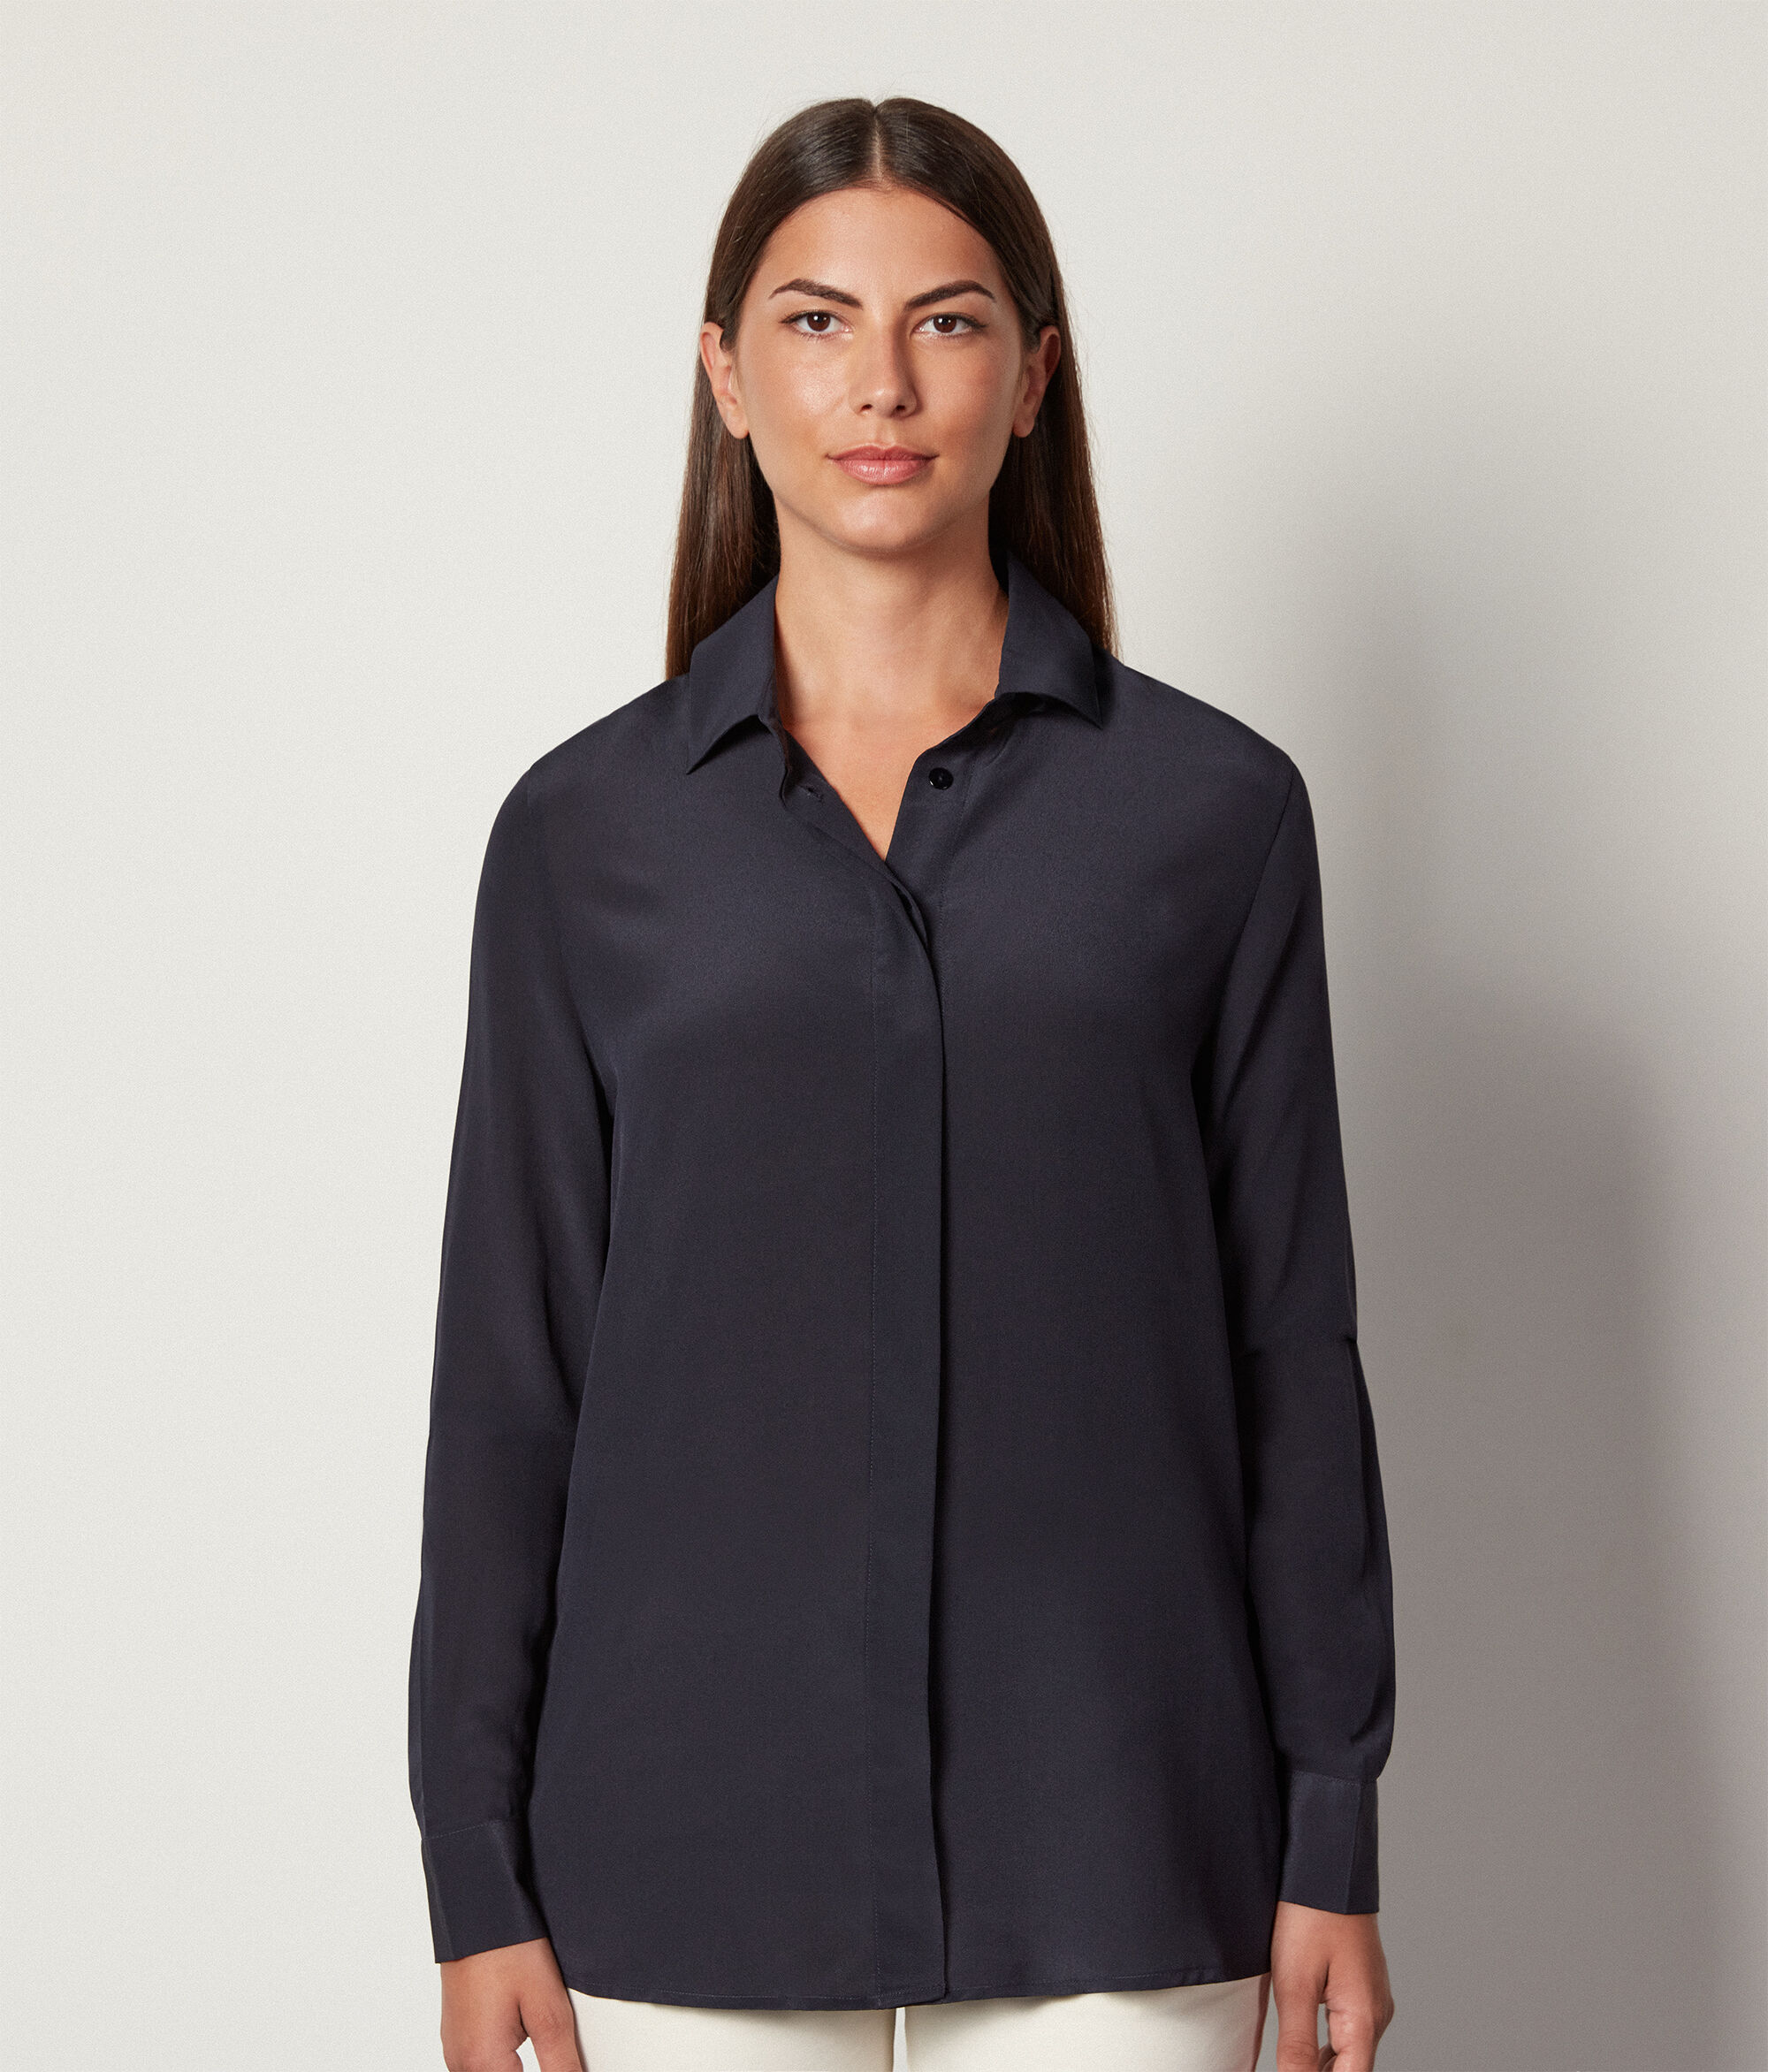 Silk Blouse with Small Collar